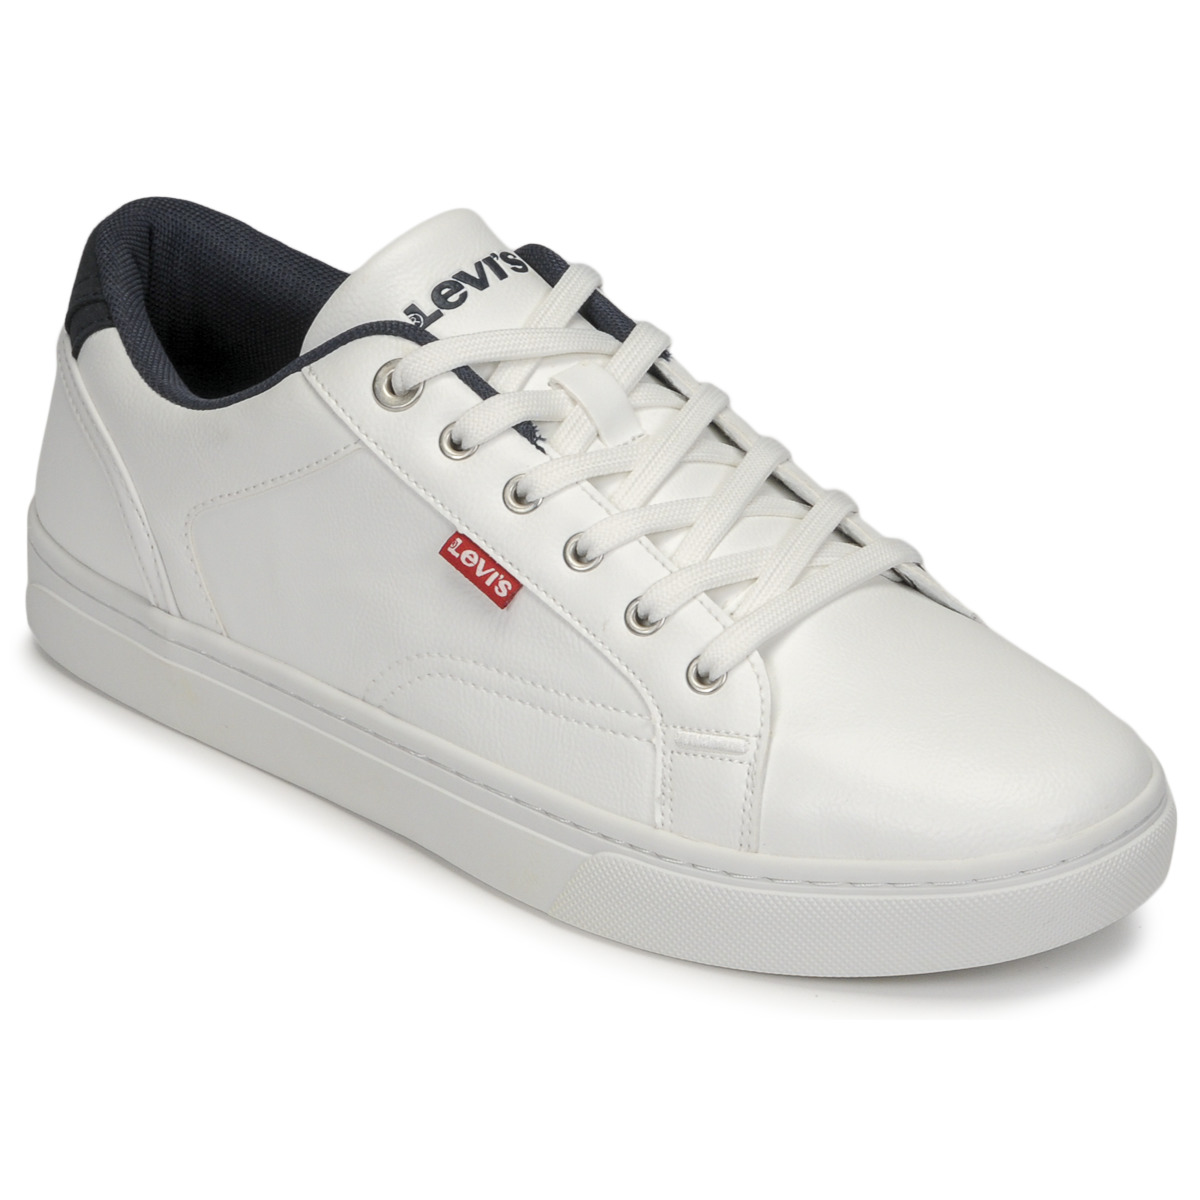 Levi's Courtright White